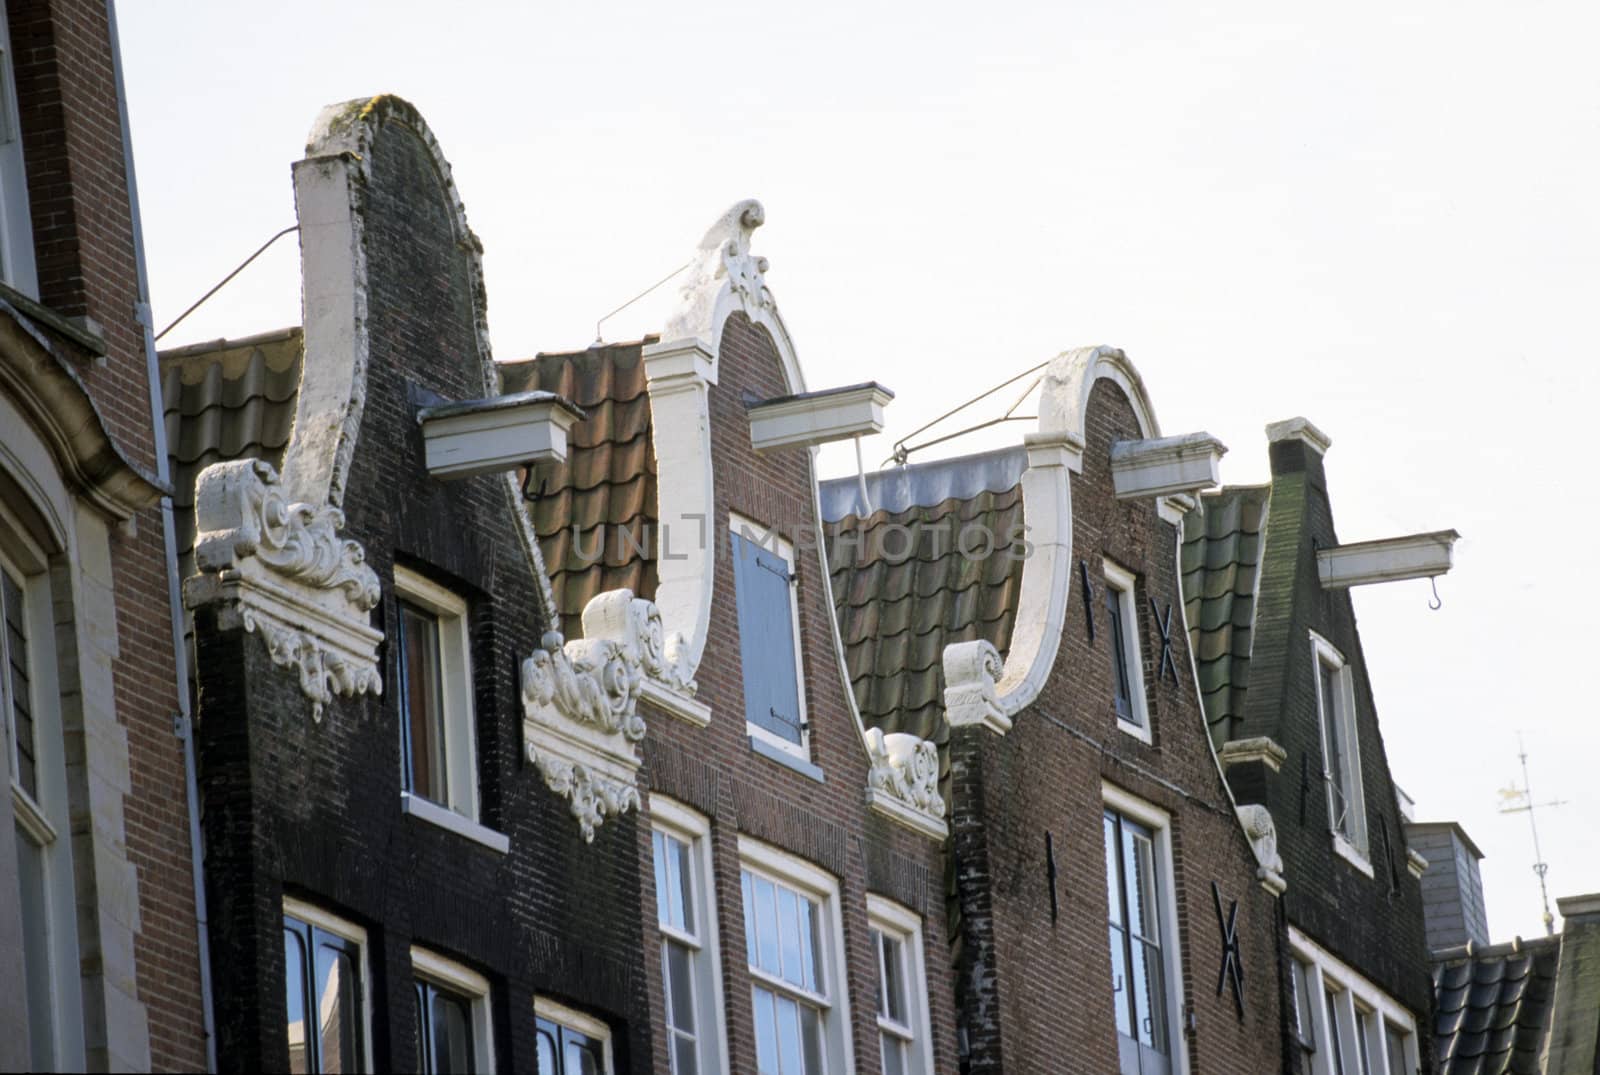 Hooks for lifting furniture are a common feature of Amsterdam's traditional canal houses.